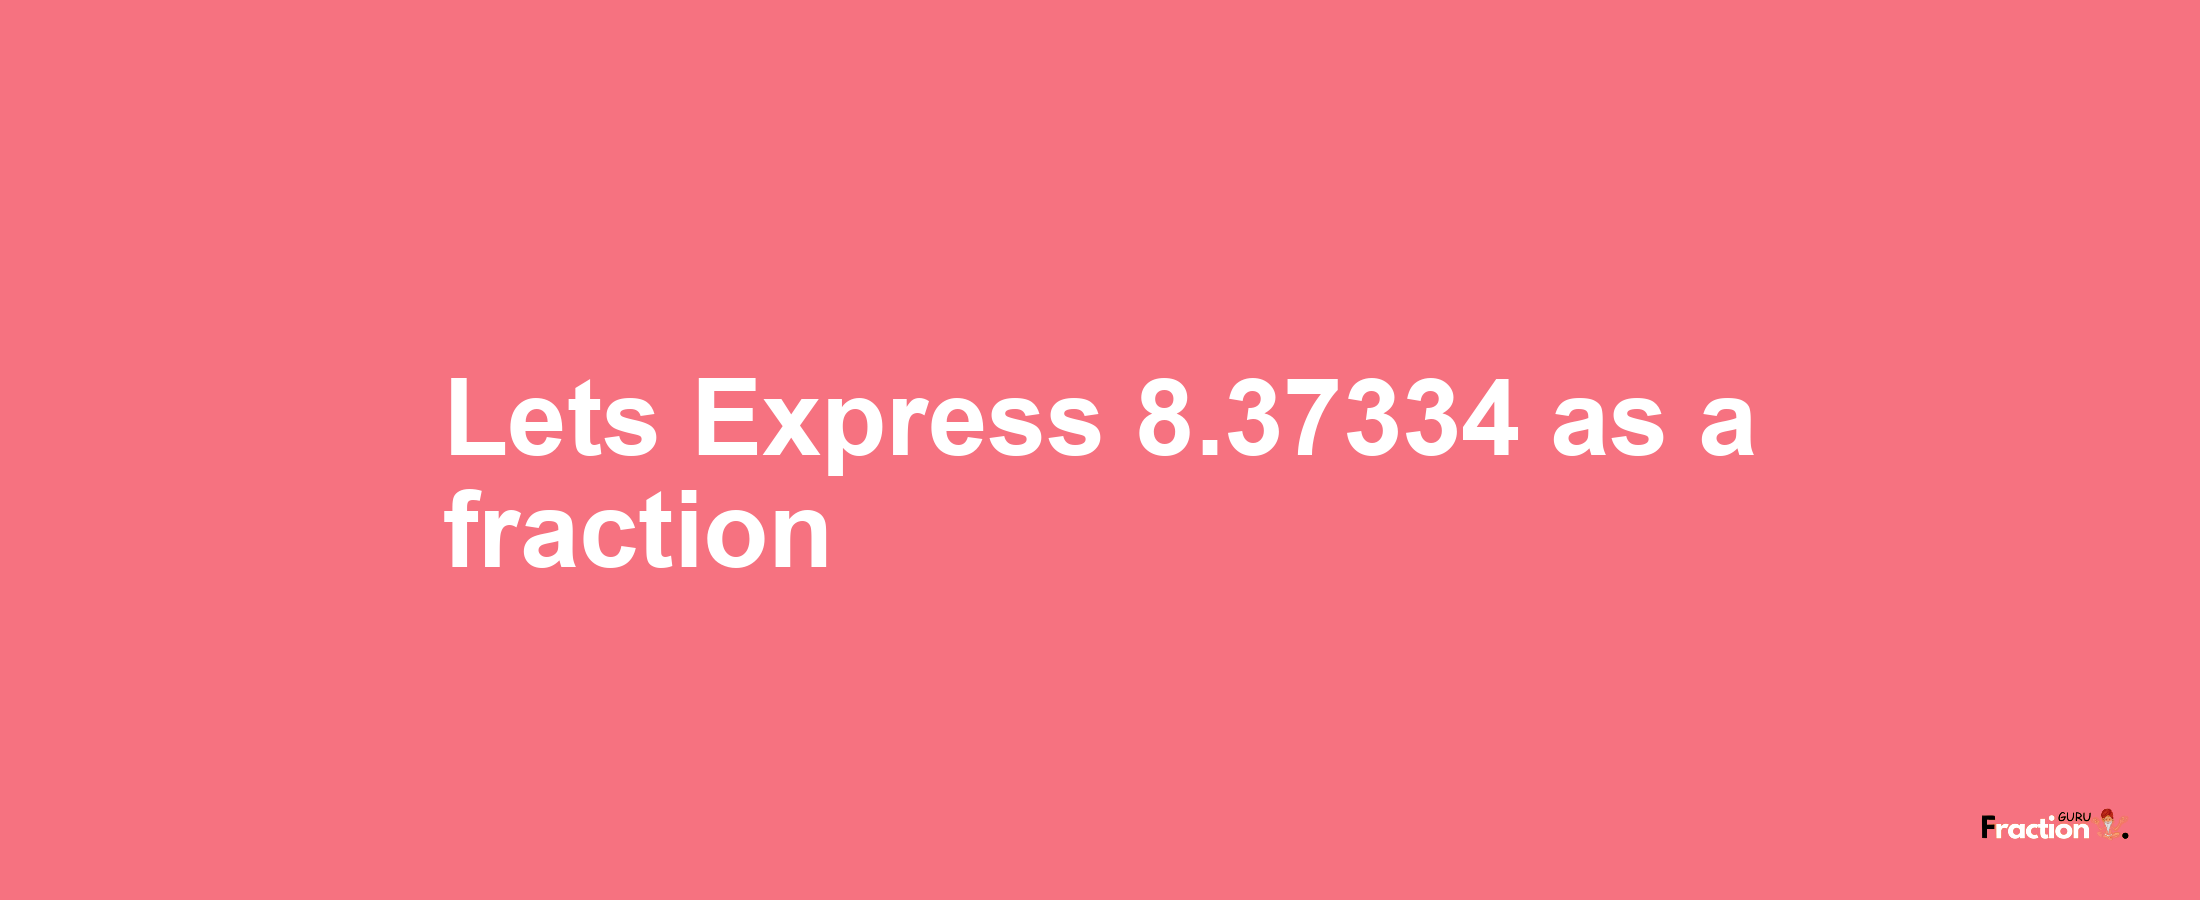 Lets Express 8.37334 as afraction